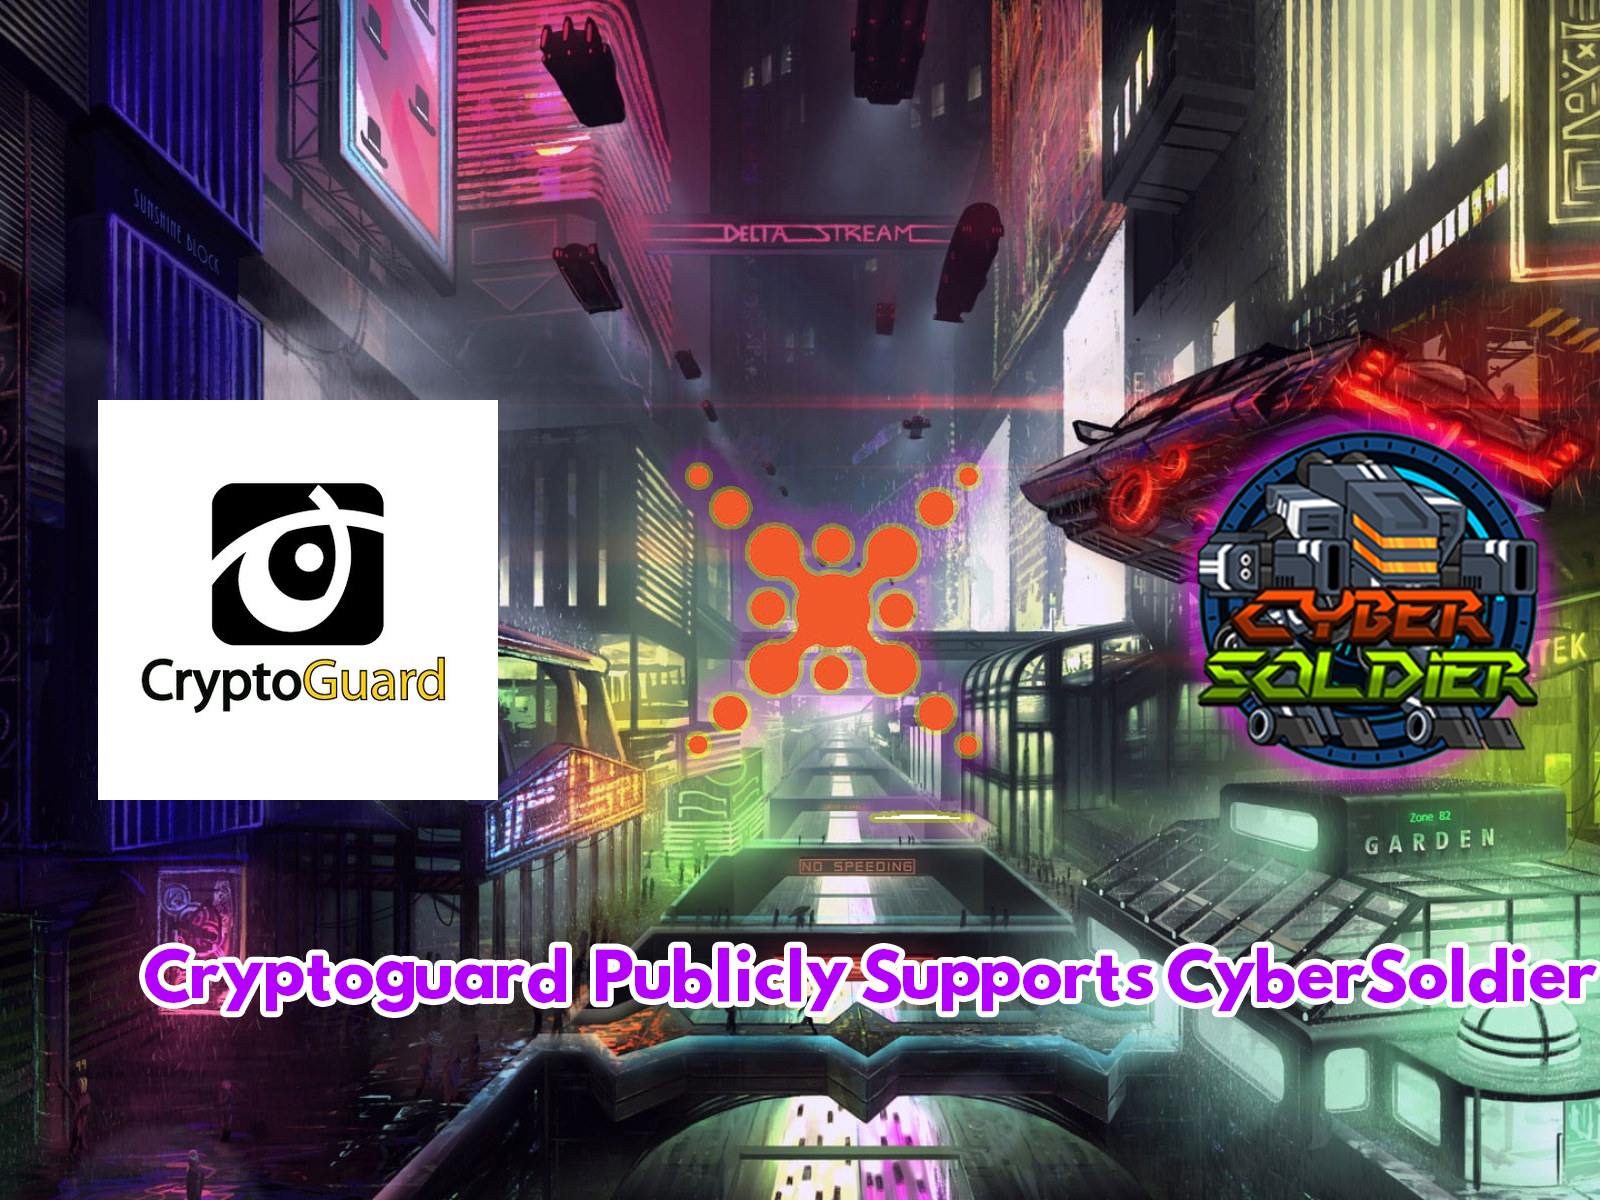 cryptoguard-publicly-supports-cybersoldier